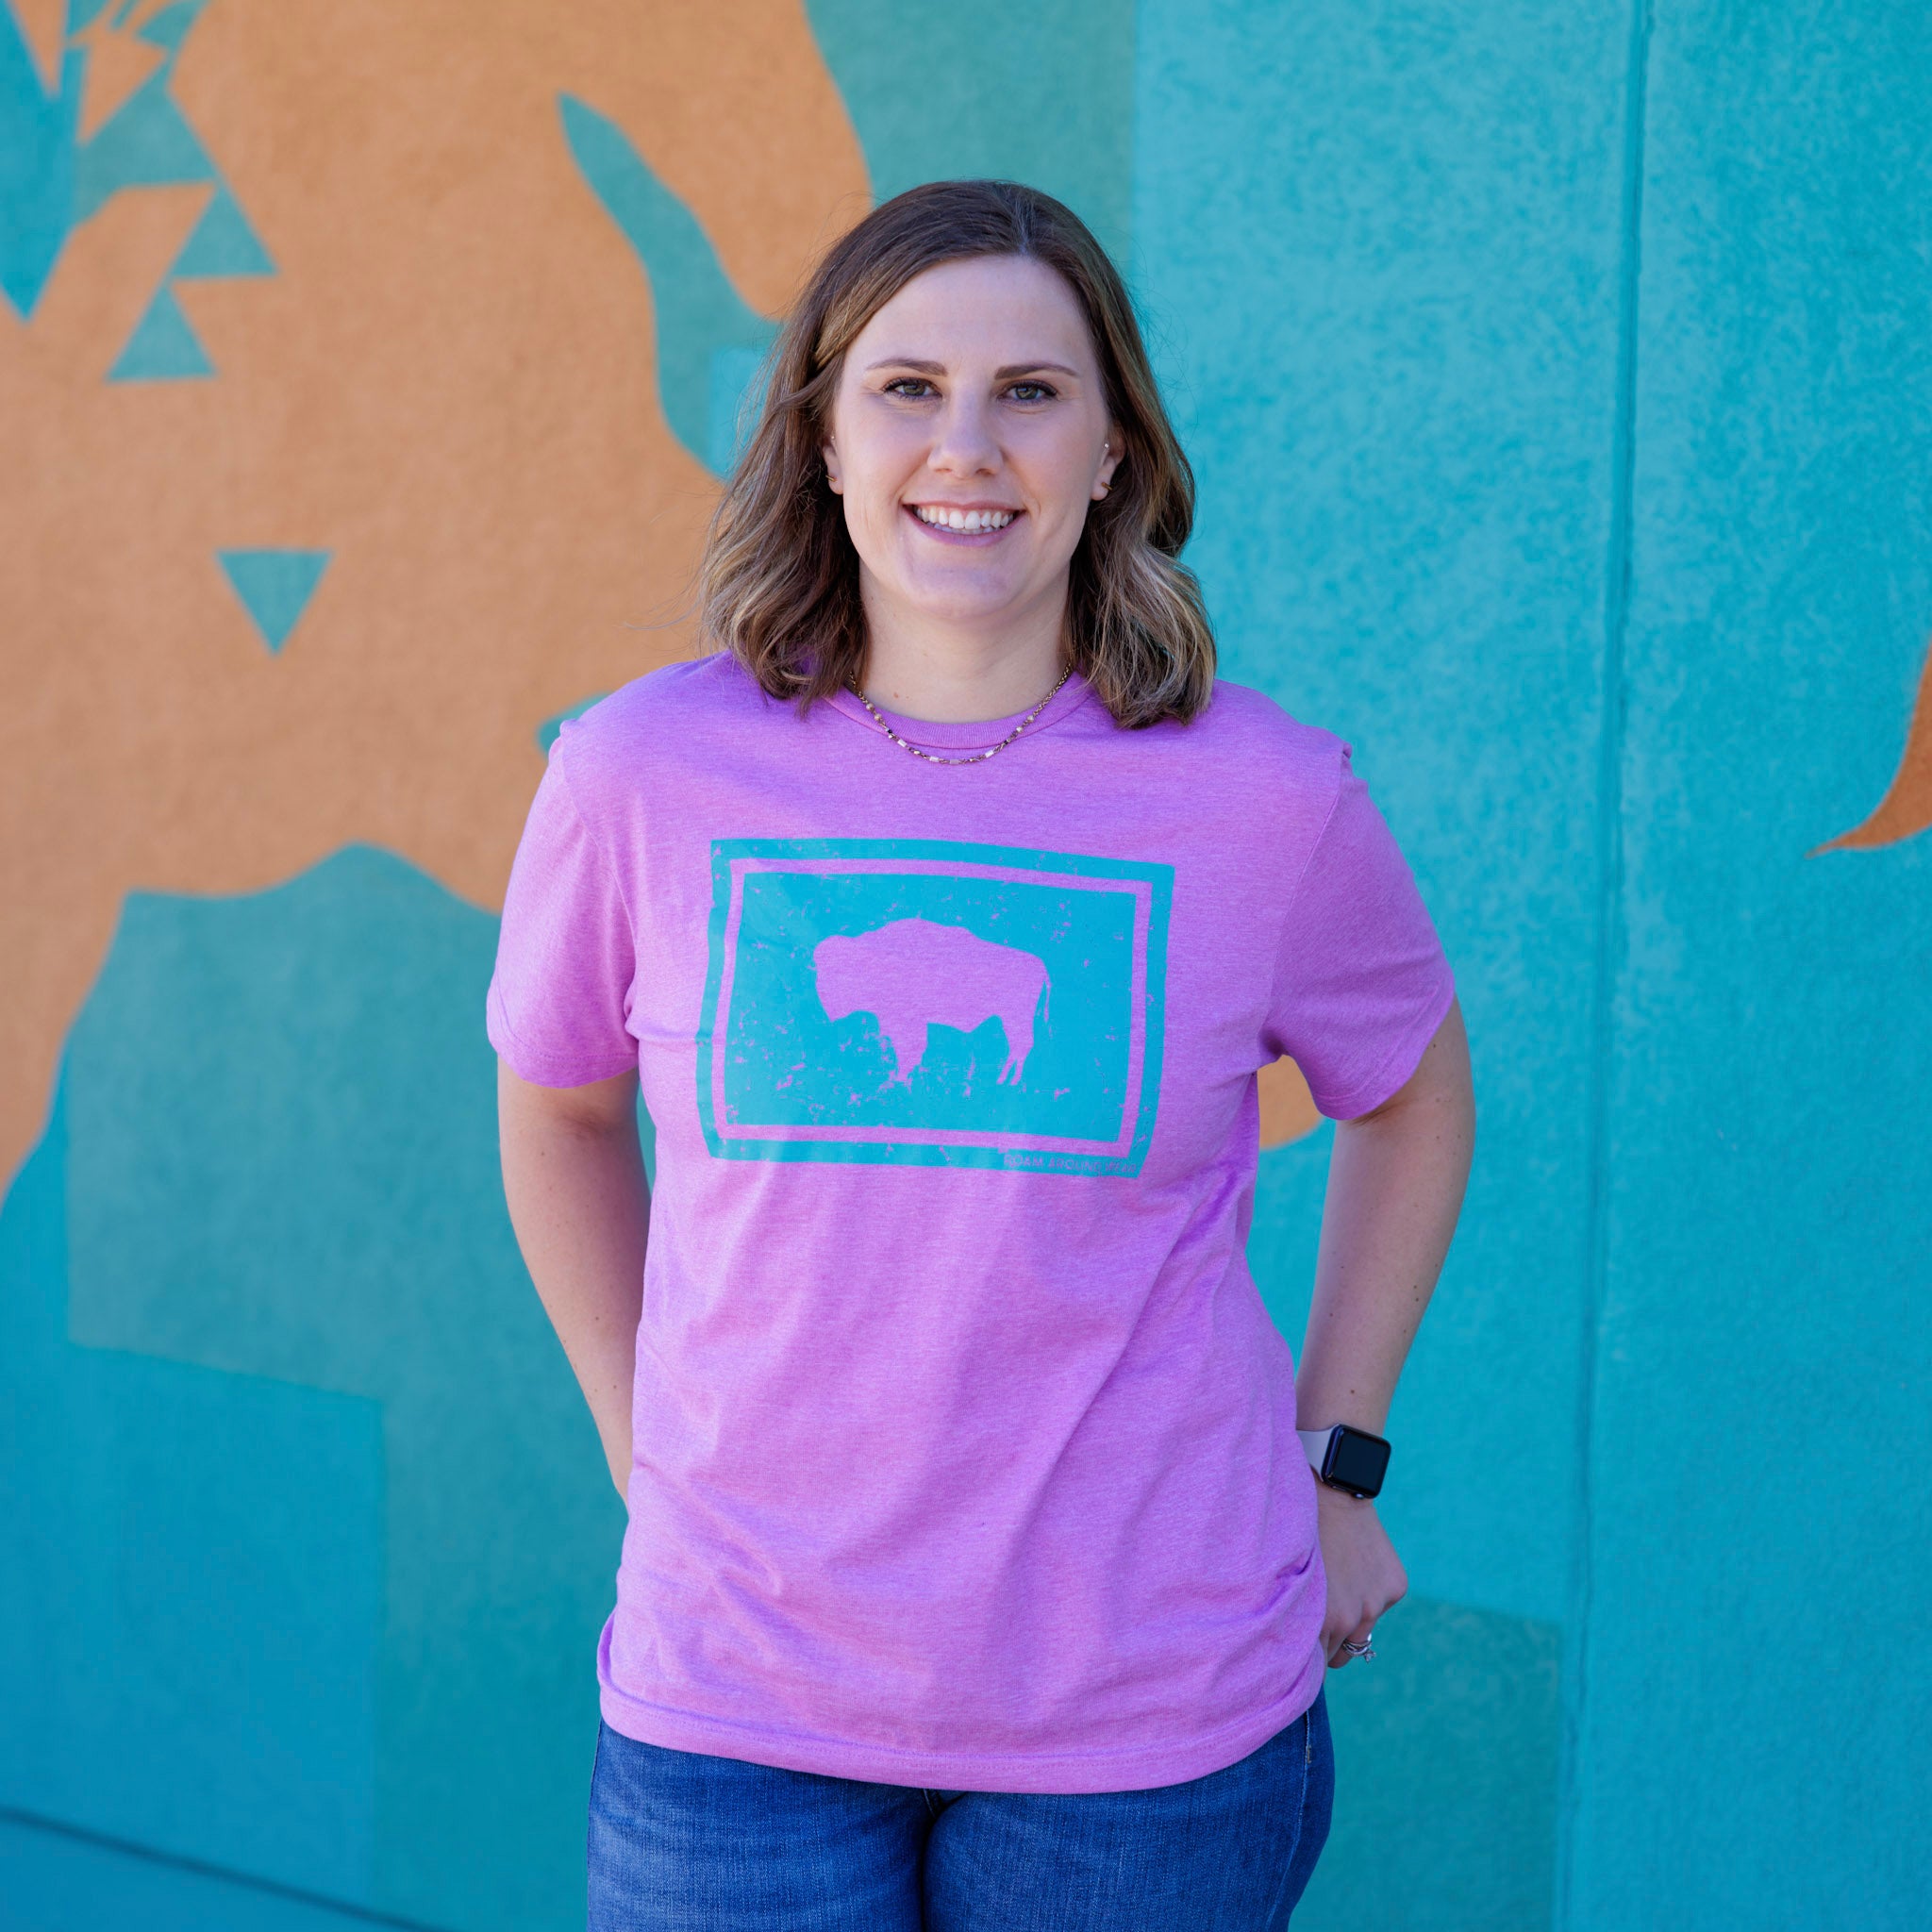 Spring tee. Wyoming bison tee. Western bison t-shirt. Unisex tee. Women's pink tee with teal bison. Roam Around Wear is a Wyoming t-shirt company based in Gillette, Wyoming